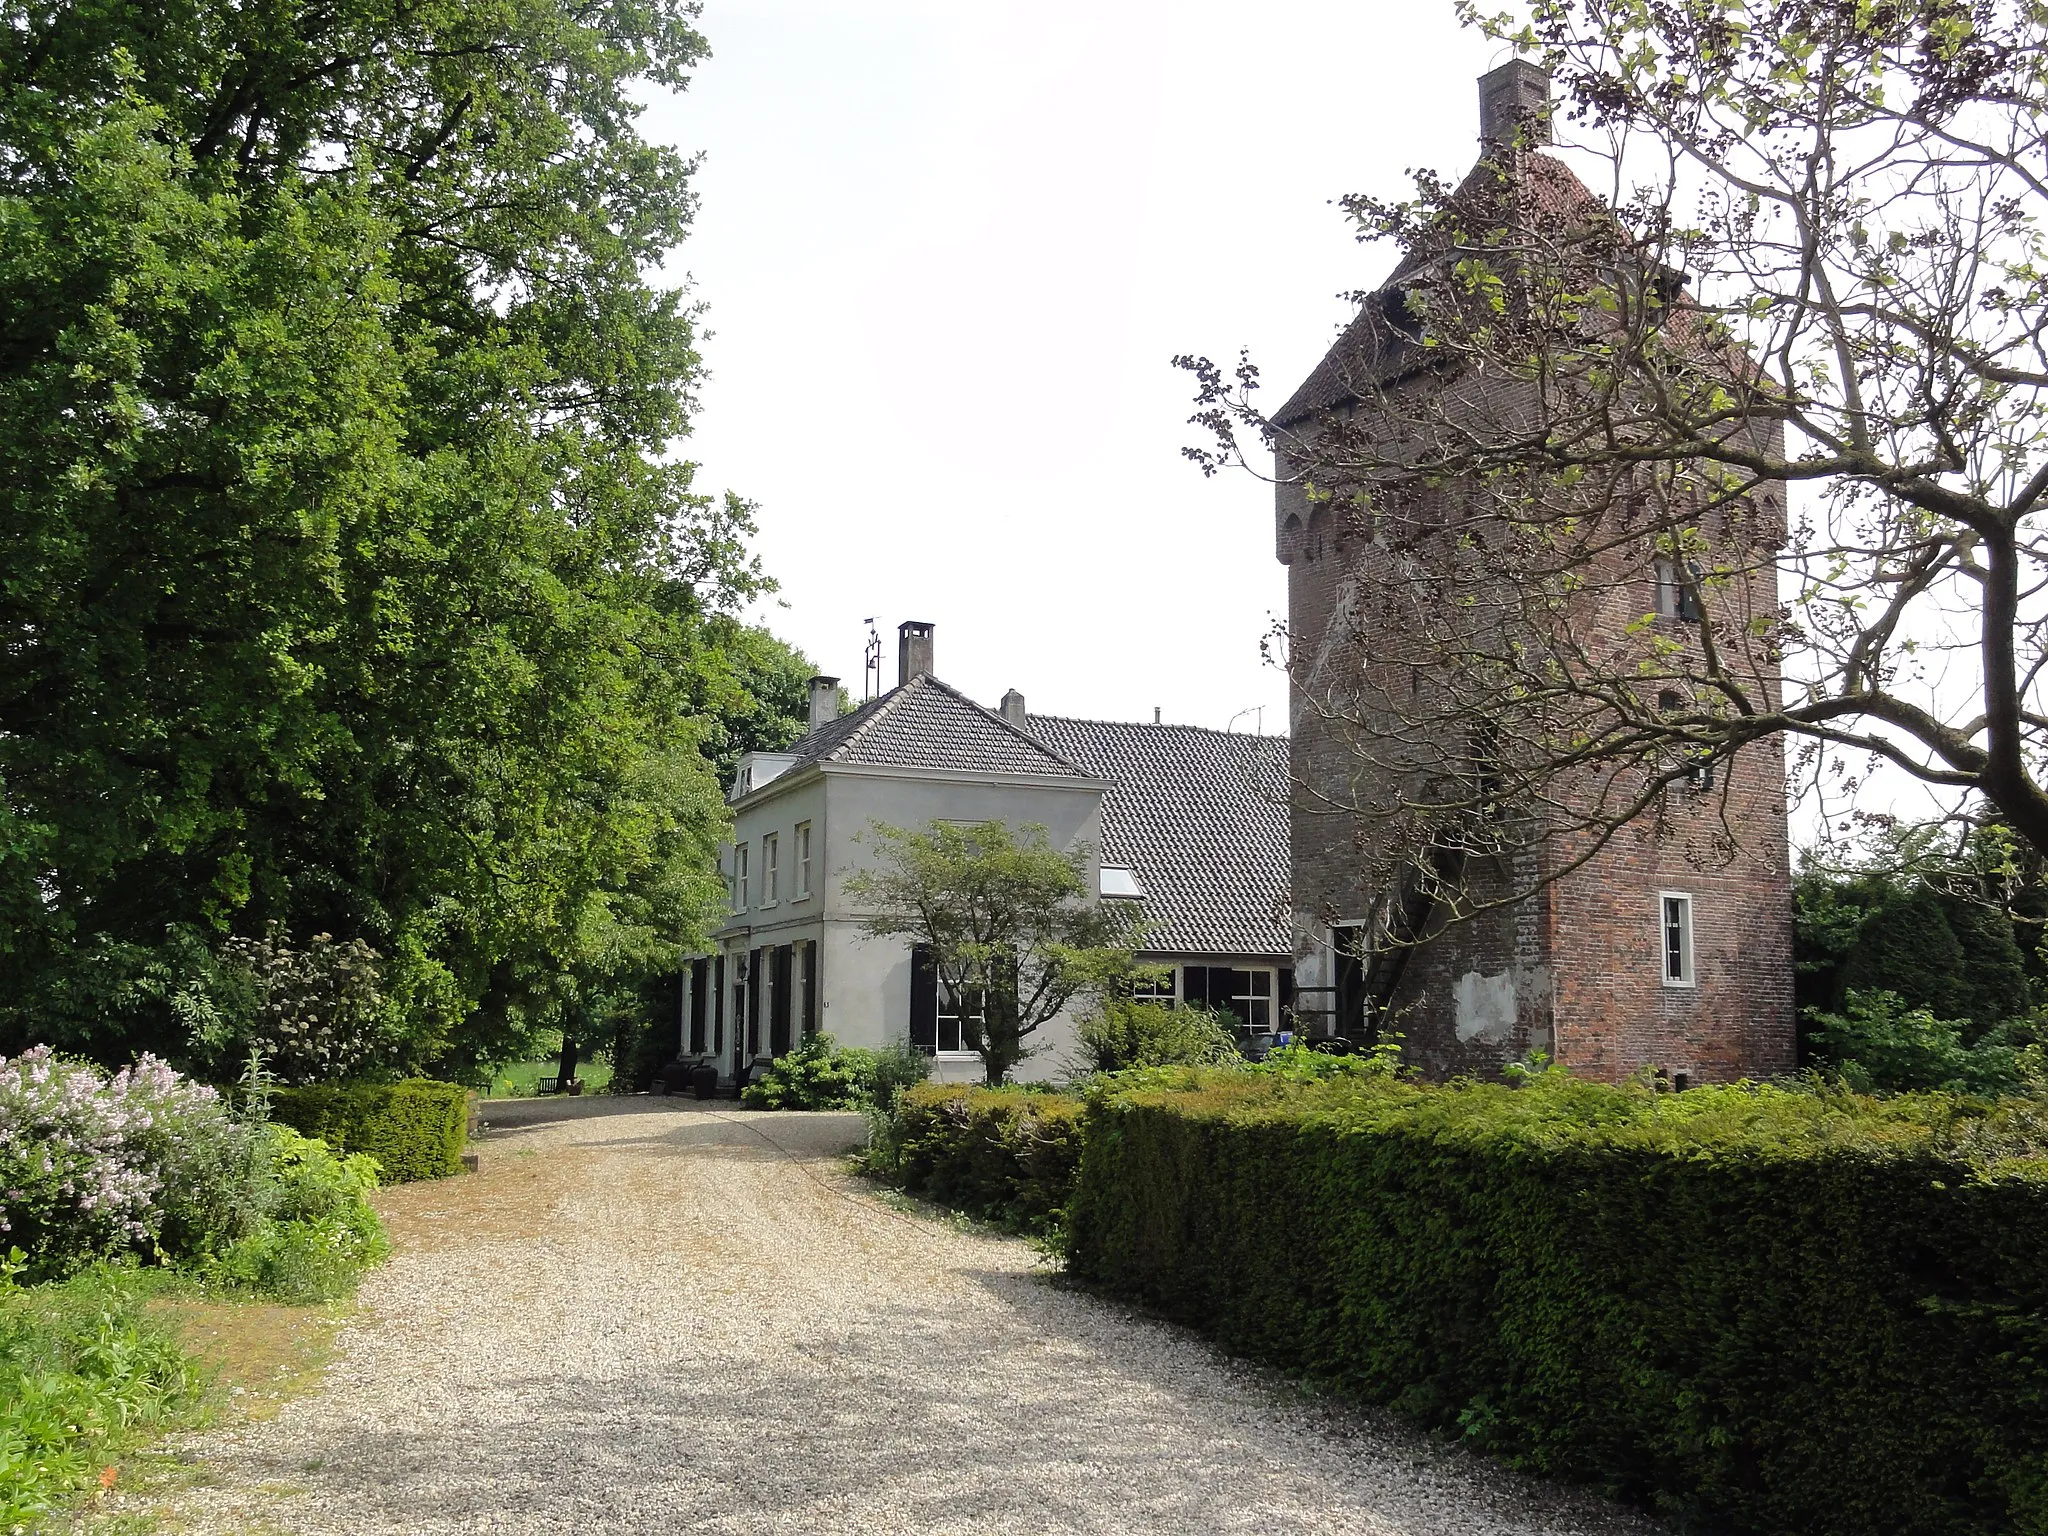 Photo showing: This is an image of rijksmonument number 16079